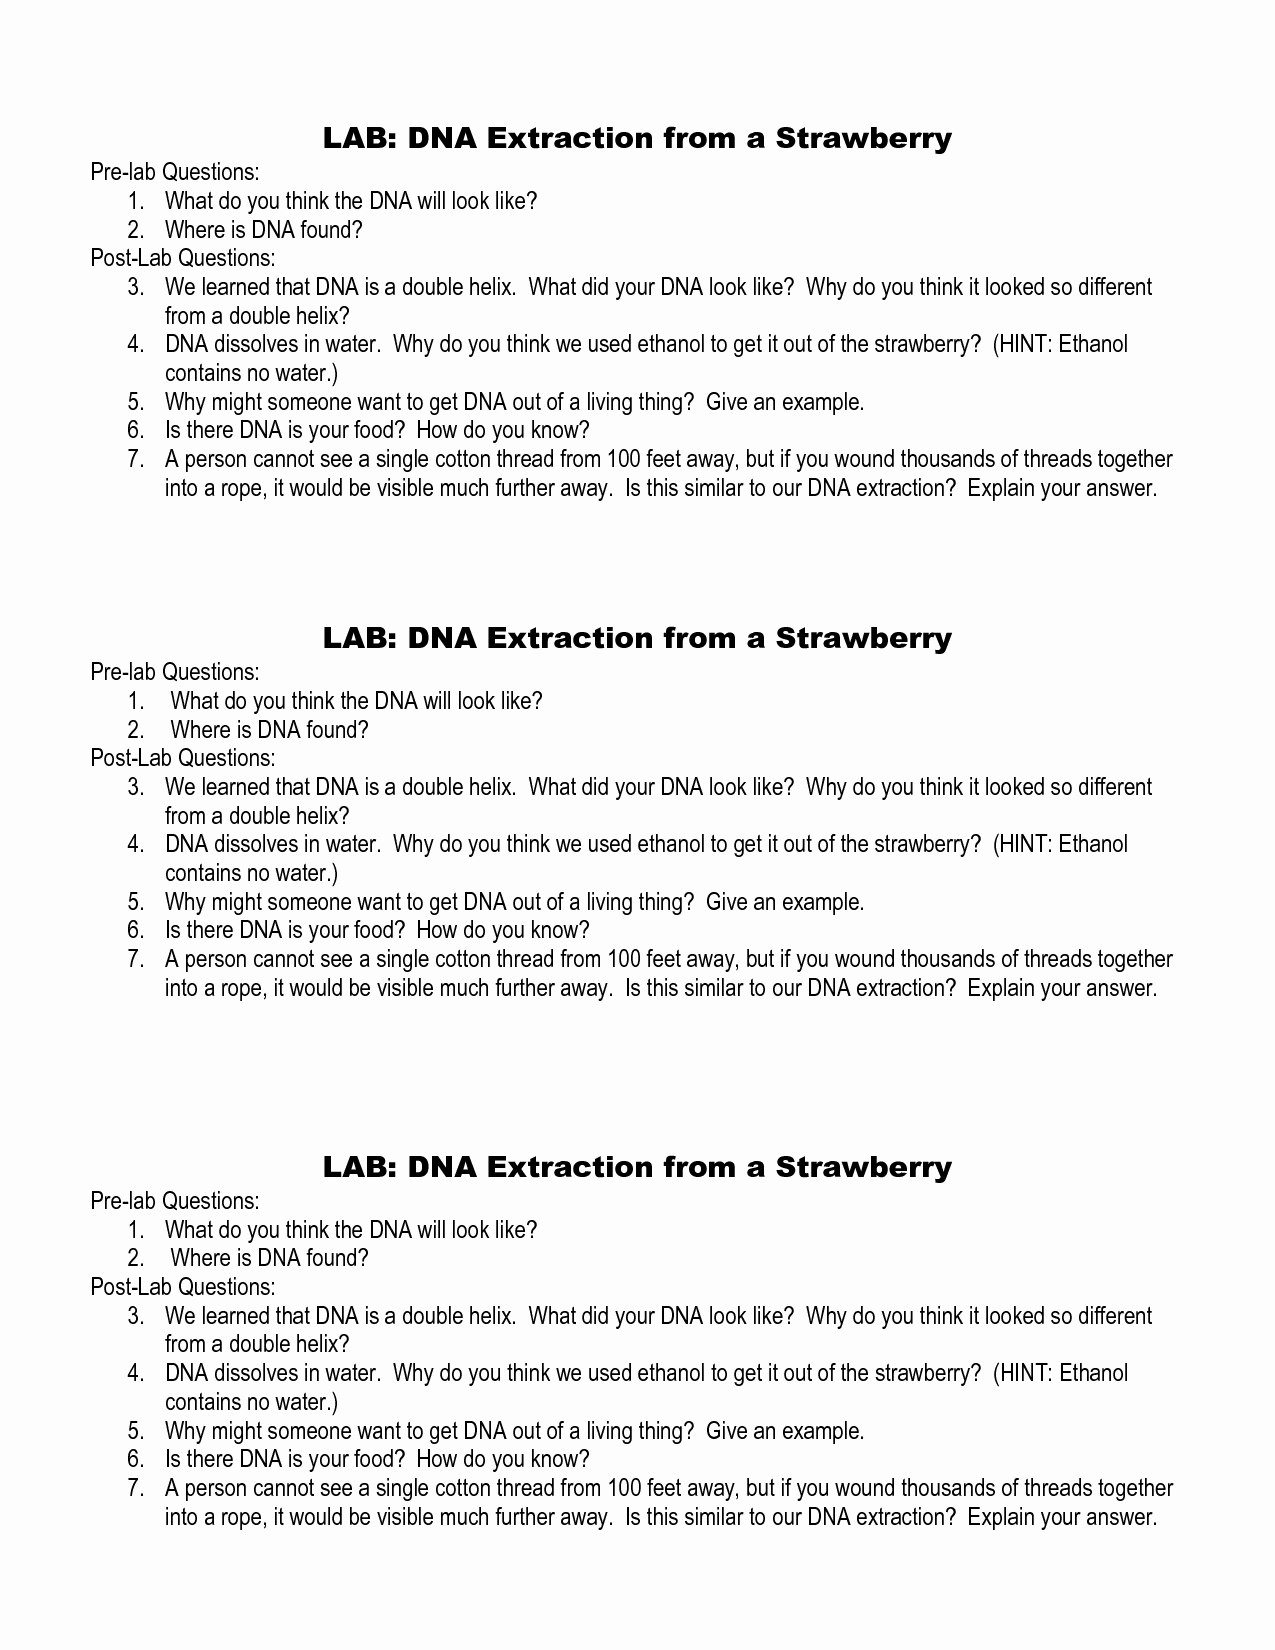 Strawberry Dna Extraction Lab Worksheet Elegant Dna Extraction Lab Report Extracting Ion Dna 2019 02 17